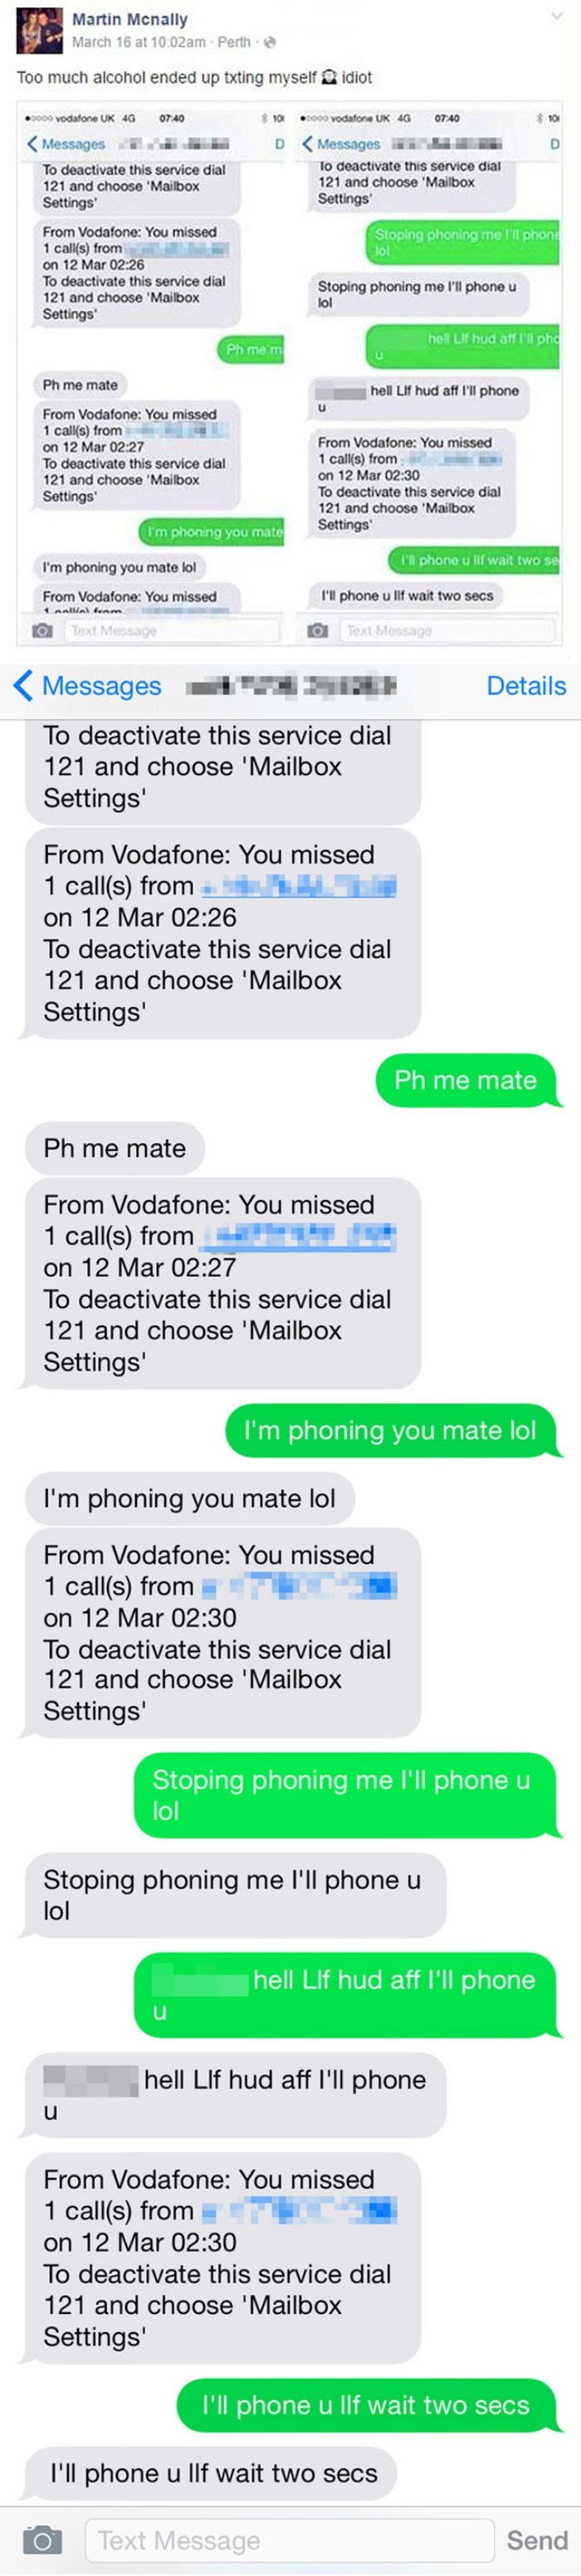 funny fail image drunk bro argues with himself all night via text